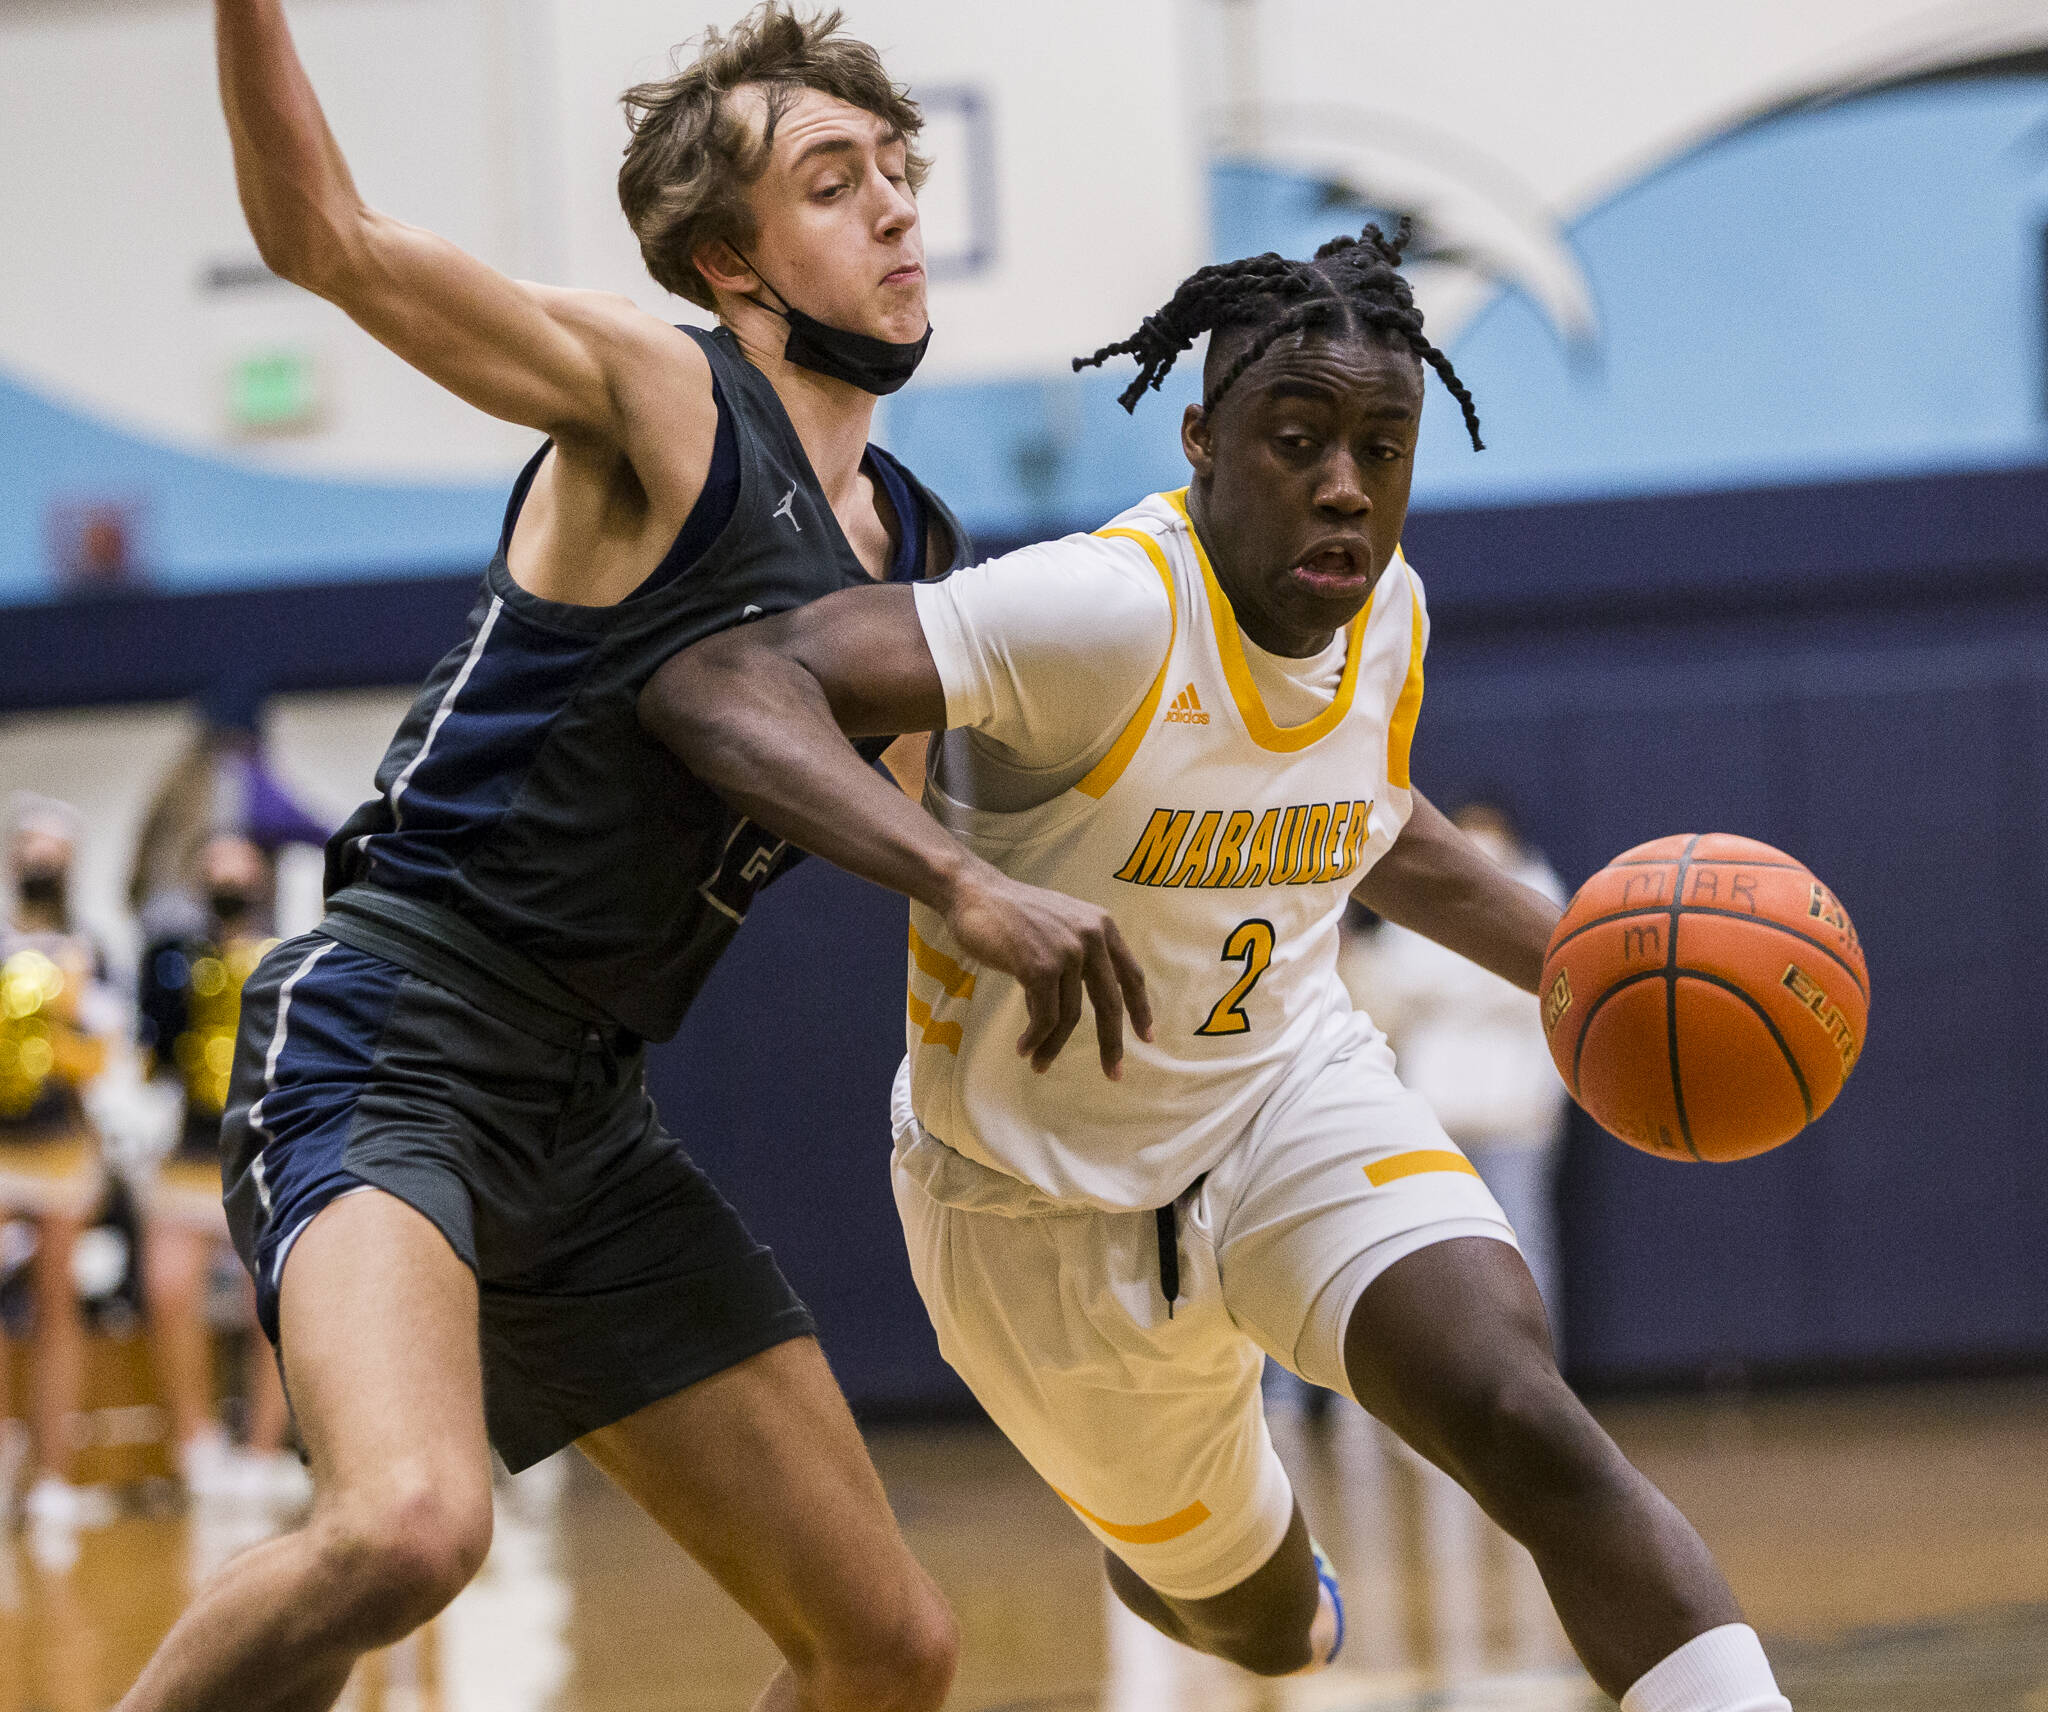 Prep basketball weekly update: Storylines from around the area |  HeraldNet.com